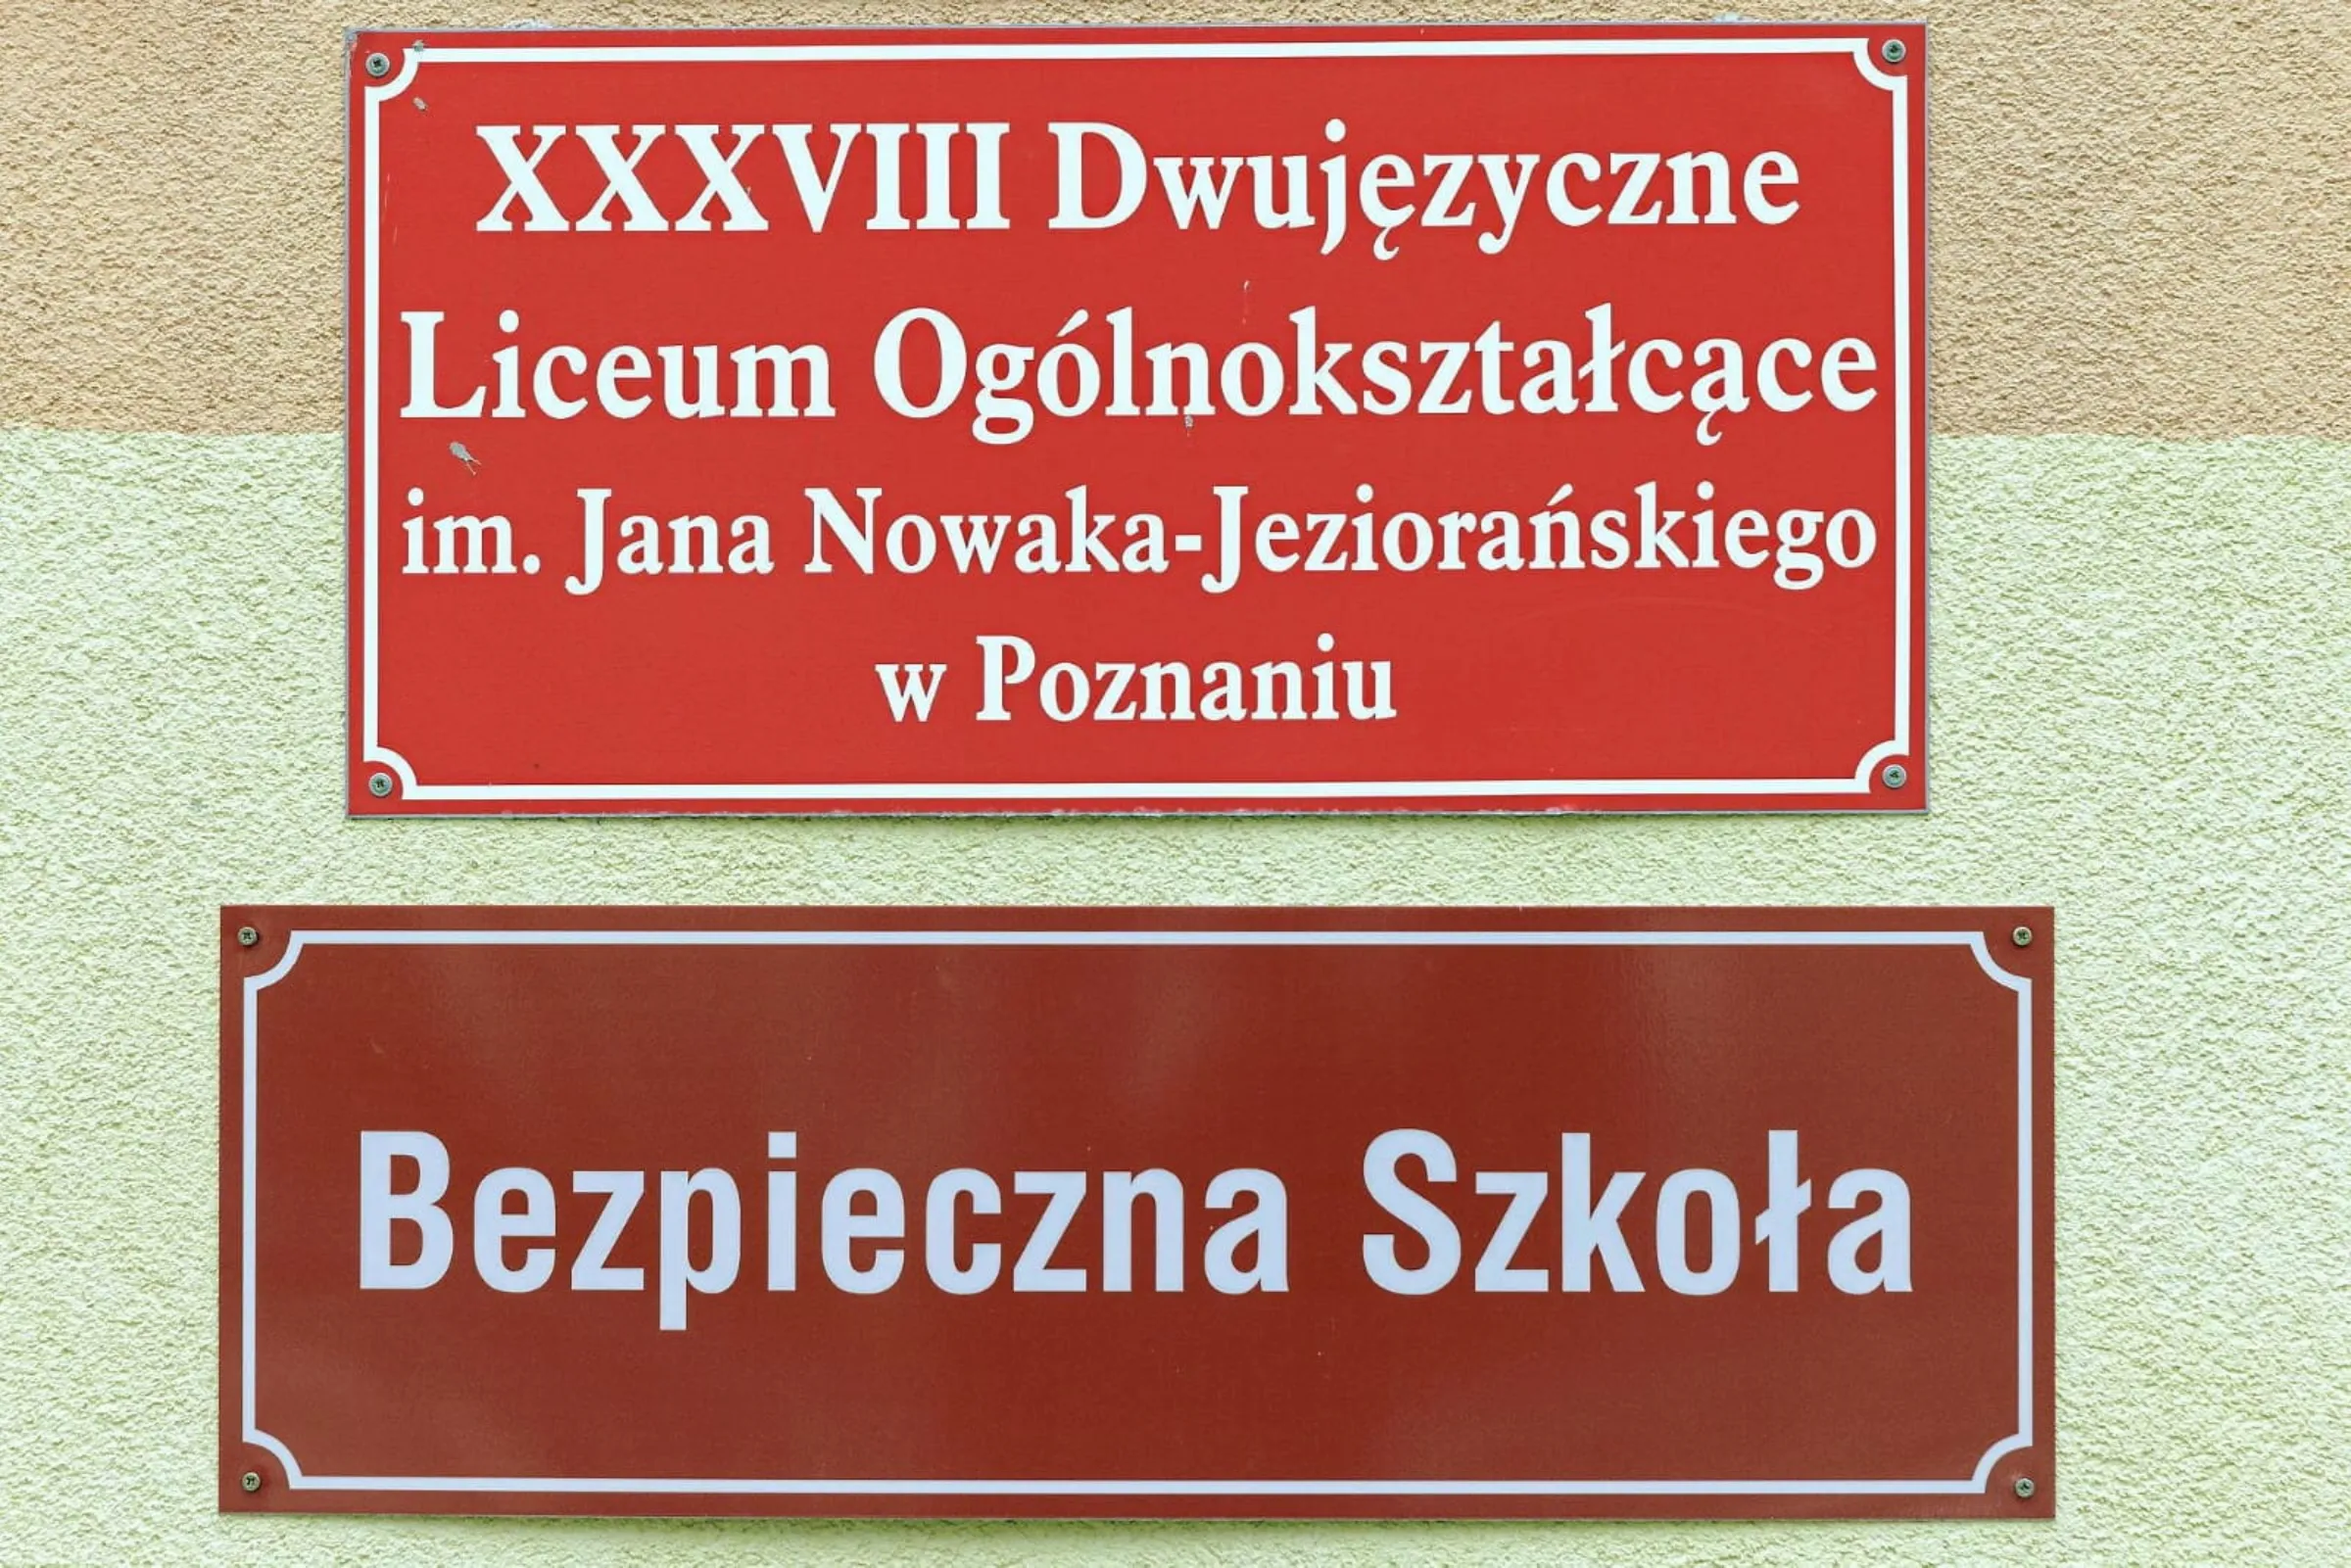 A plaque at the entrance of the 38th Bilingual High School Jan Nowak-Jezioranski in Poznan, in western Poland, labels the institution as a 'safe school' after it won first place in the country’s pioneering ranking of LGBTQ+ inclusion in schools - the first of its kind in the European Union